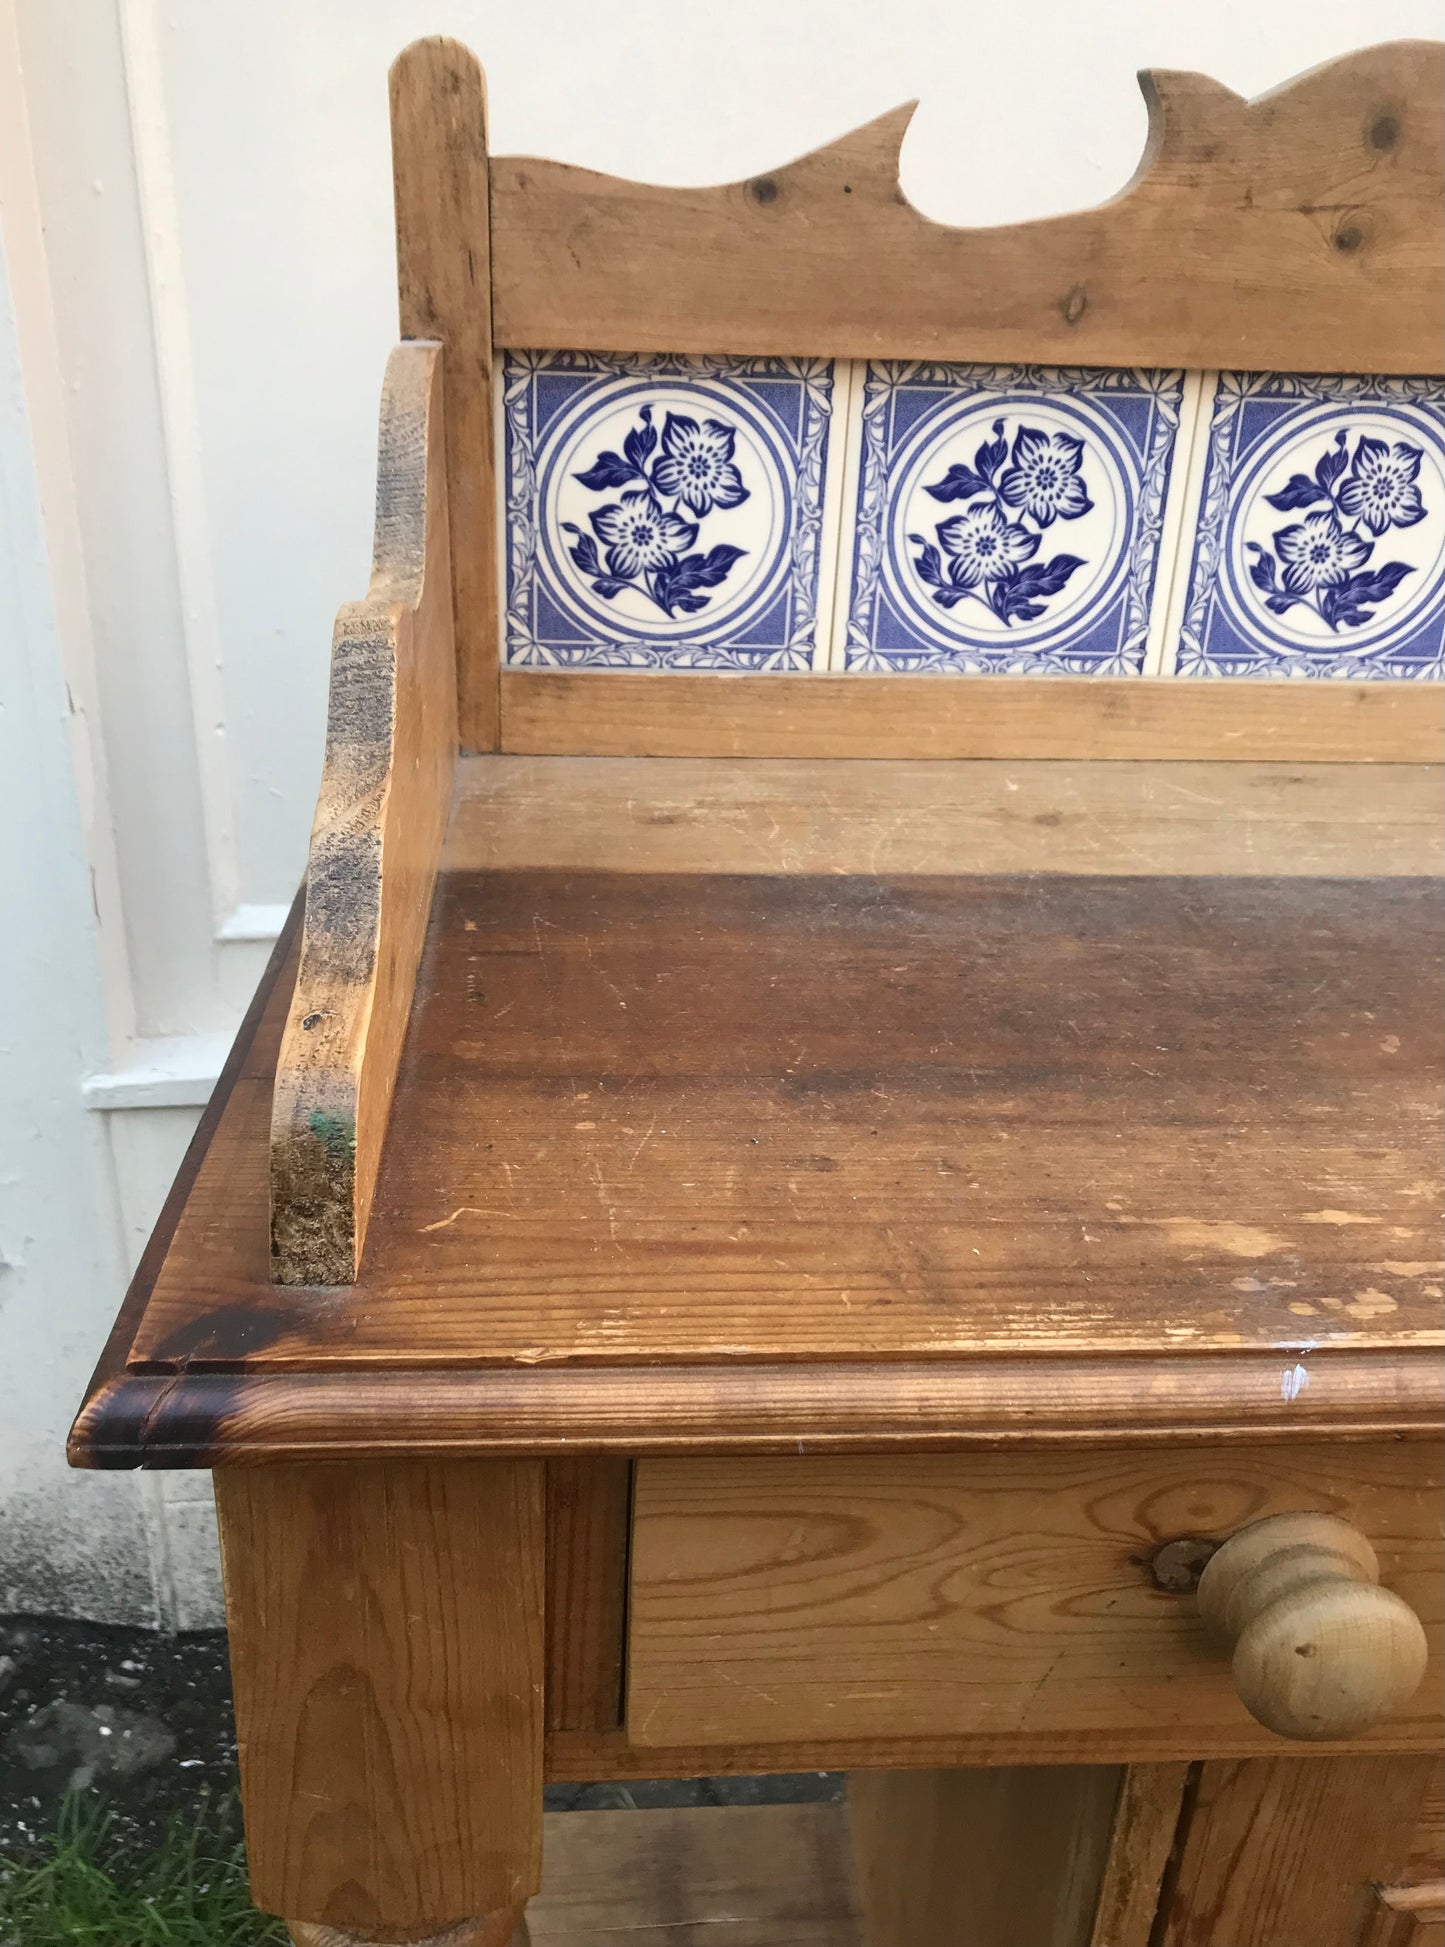 Beautiful pine antique wash stand with original blue and white tiles